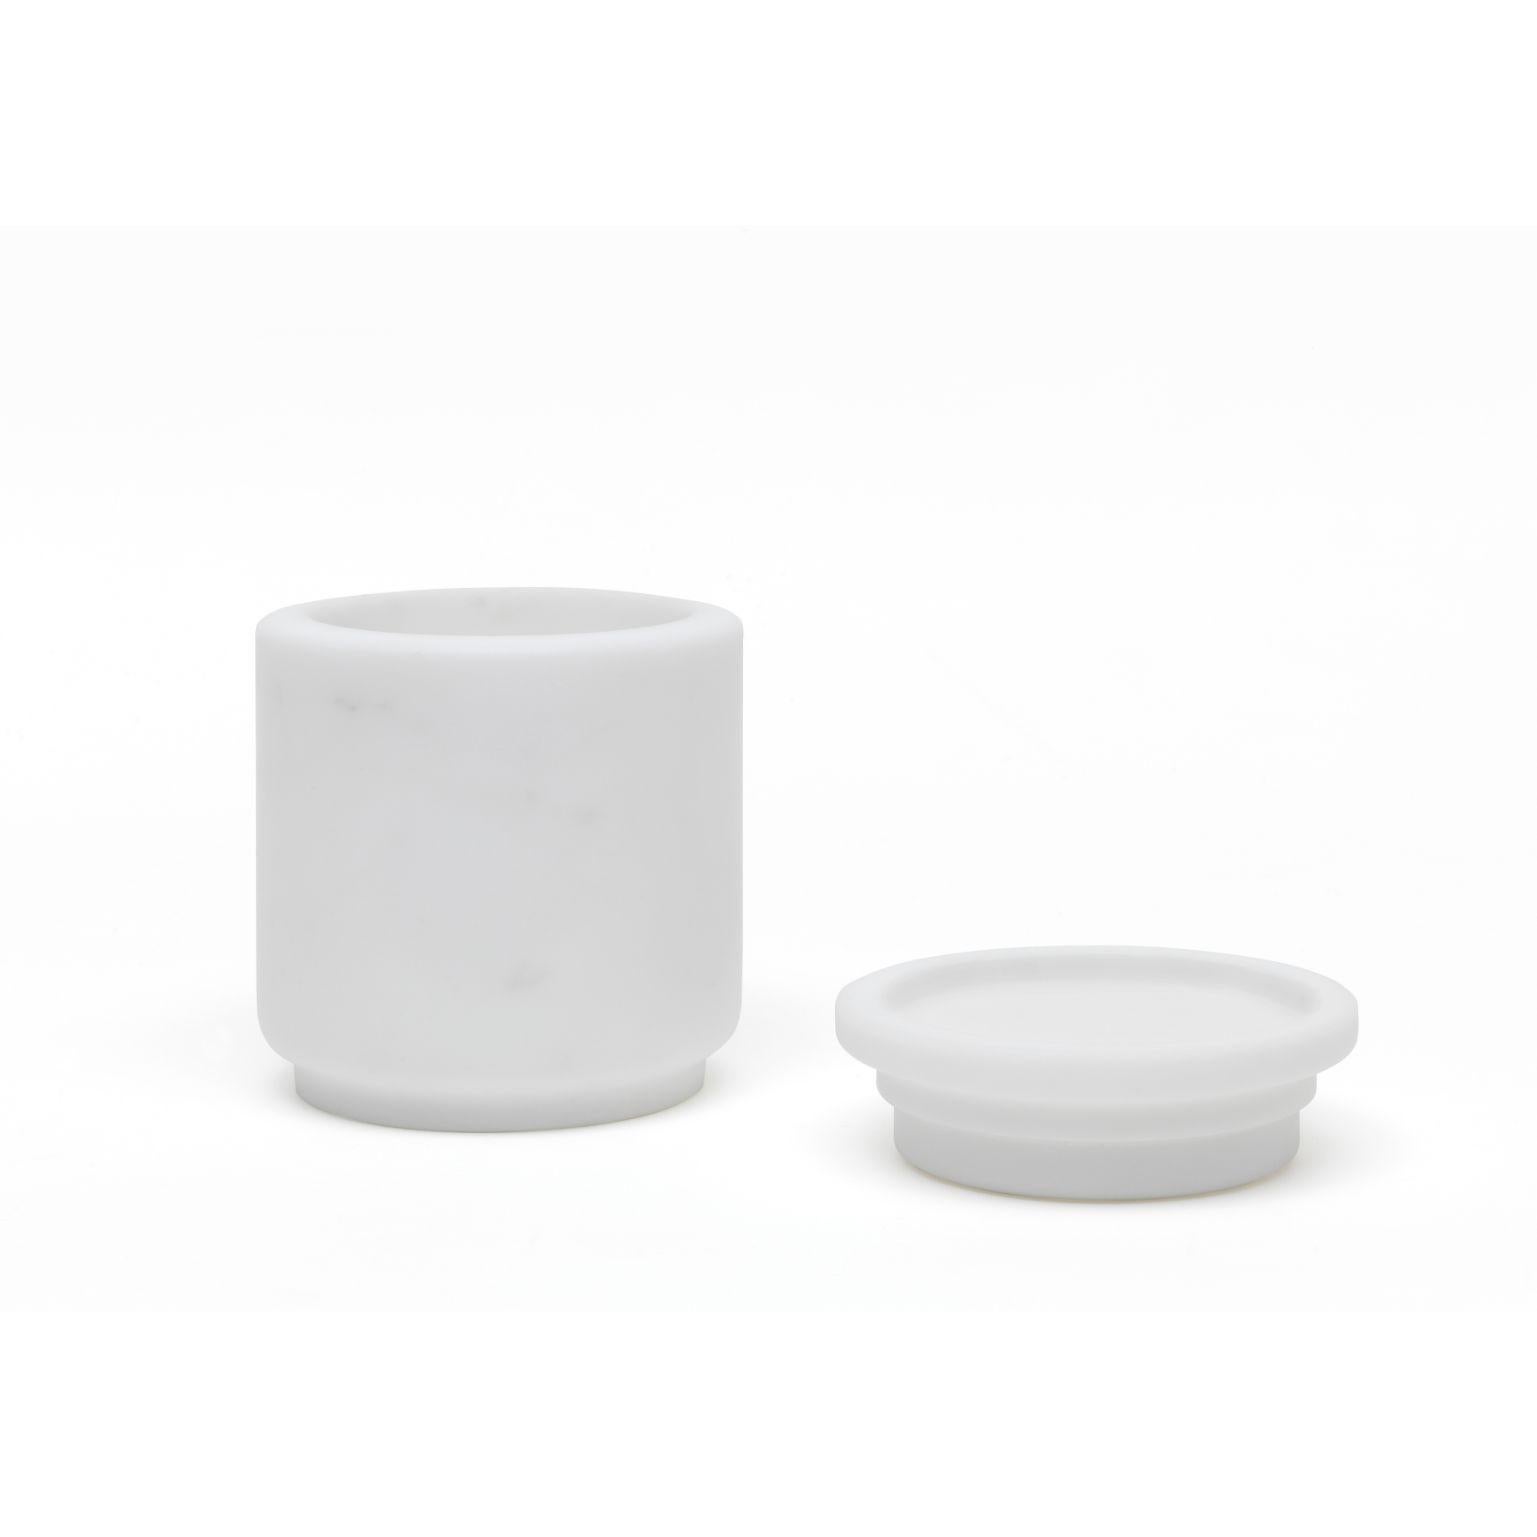 Pyxis - medium pot - white by Ivan Colominas
Pyxis collection
Dimensions: 12.6 x 14.5 cm
Materials: Bianco michelangelo

Also available: Nero marquinia, small & large,

A refined collection articulated through cylinders that vary only in size